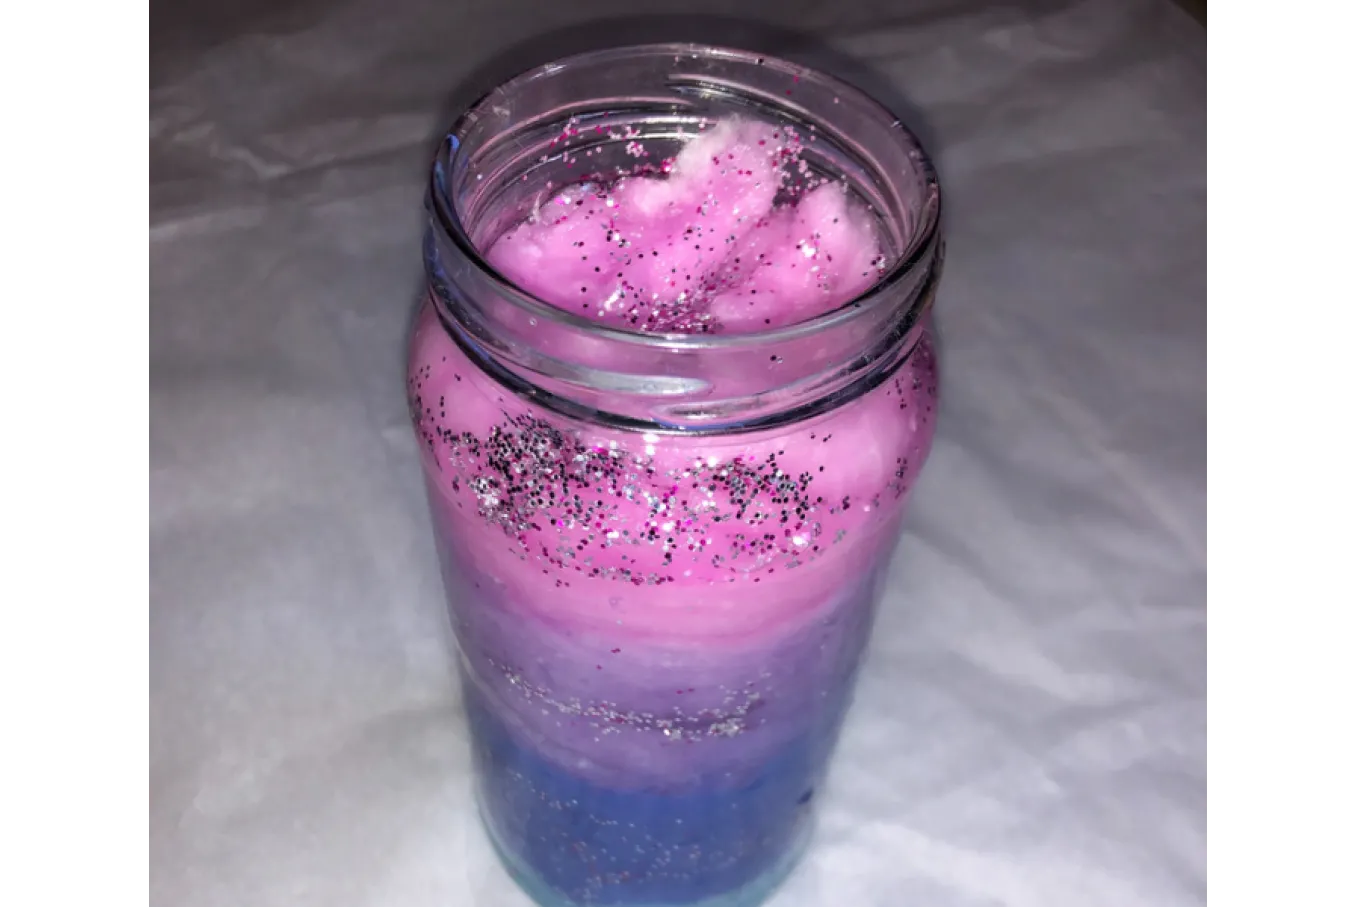 Mason Jar with different color cotton (pink, purple, periwinkle, and blue) and glitter (silver and purple) inside